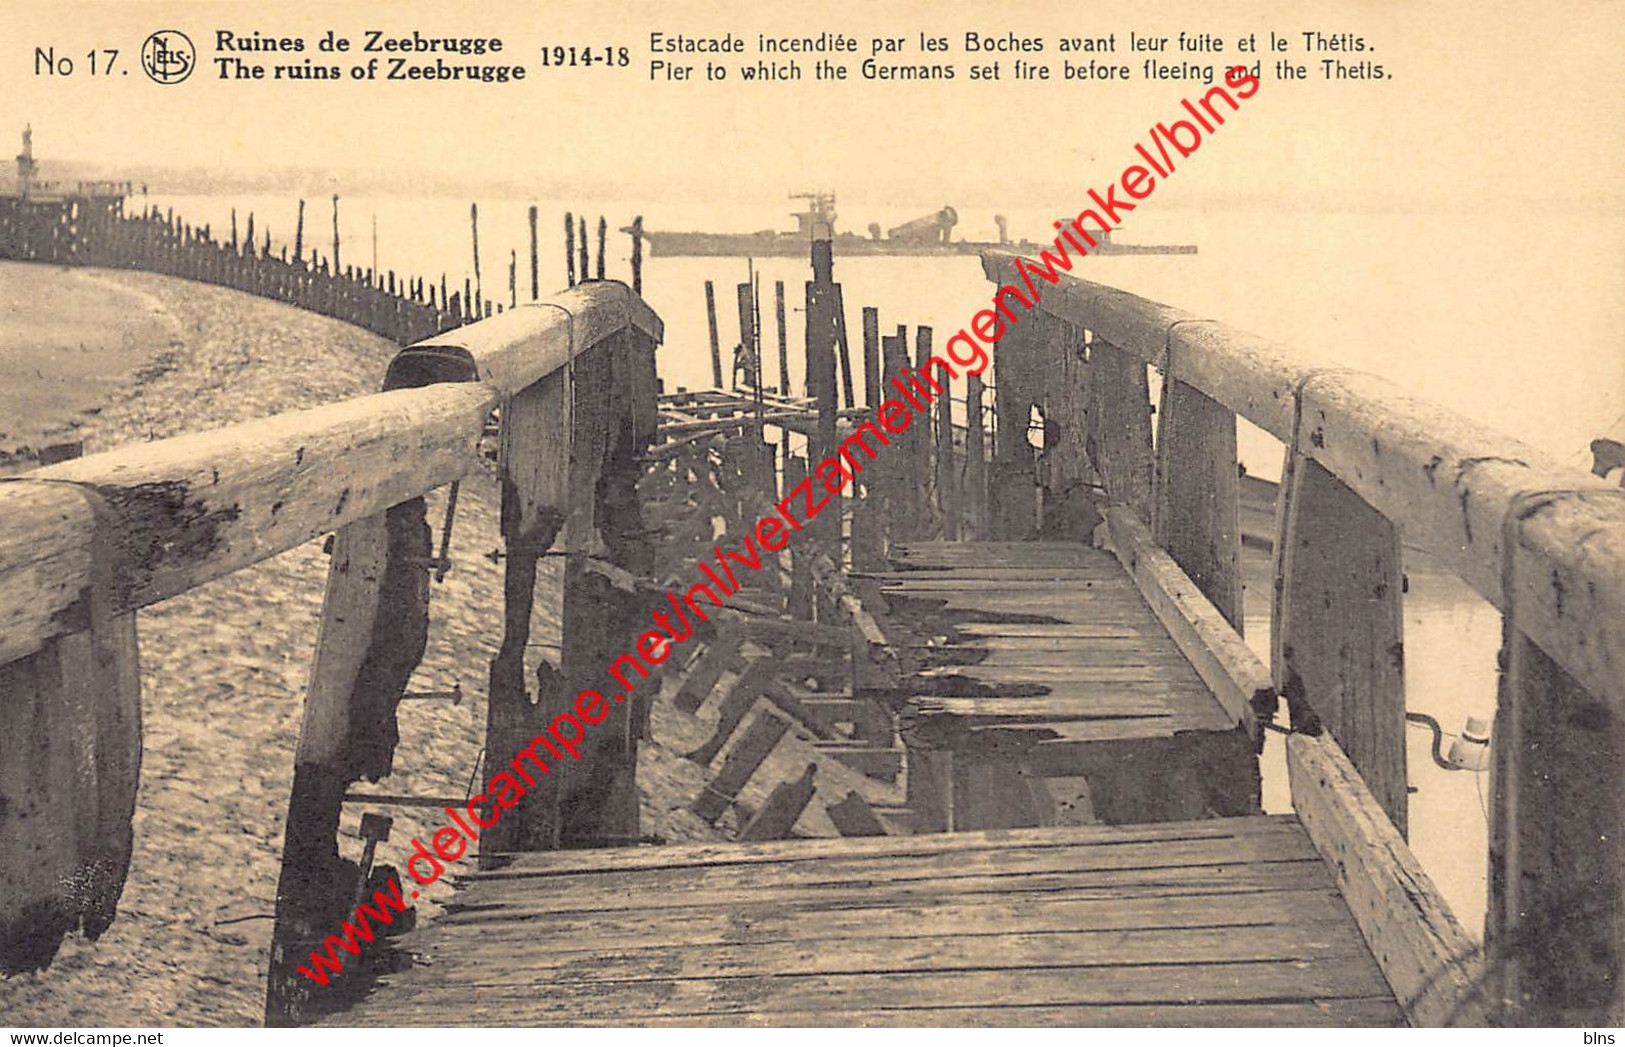 Pier To Which The Germans Set Fire Before Fleeing And The Thetis- 1914-1918 - Zeebrugge - Zeebrugge